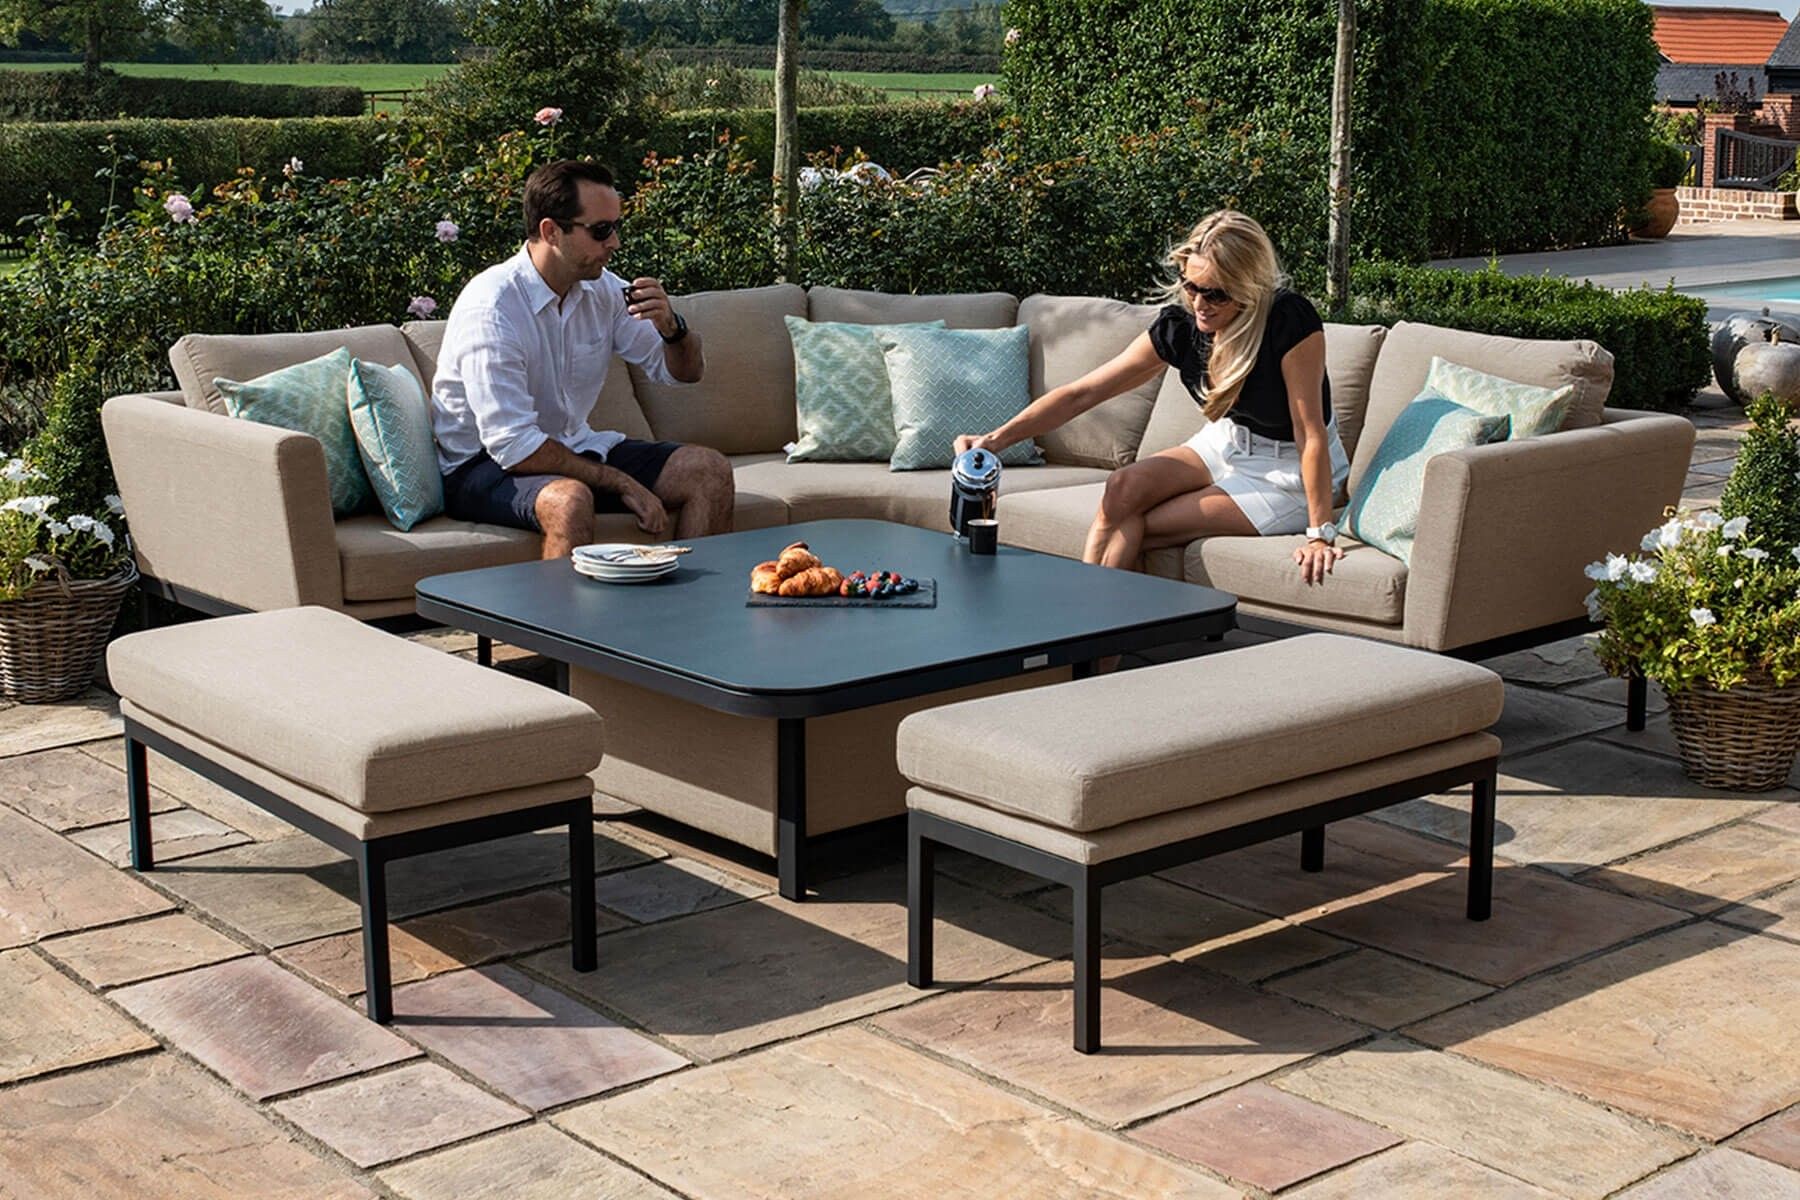 Maze Outdoor Fabric Pulse Deluxe Square Corner Dining Set – Rising Table Pertaining To Deluxe Square Patio Dining Sets (View 11 of 15)